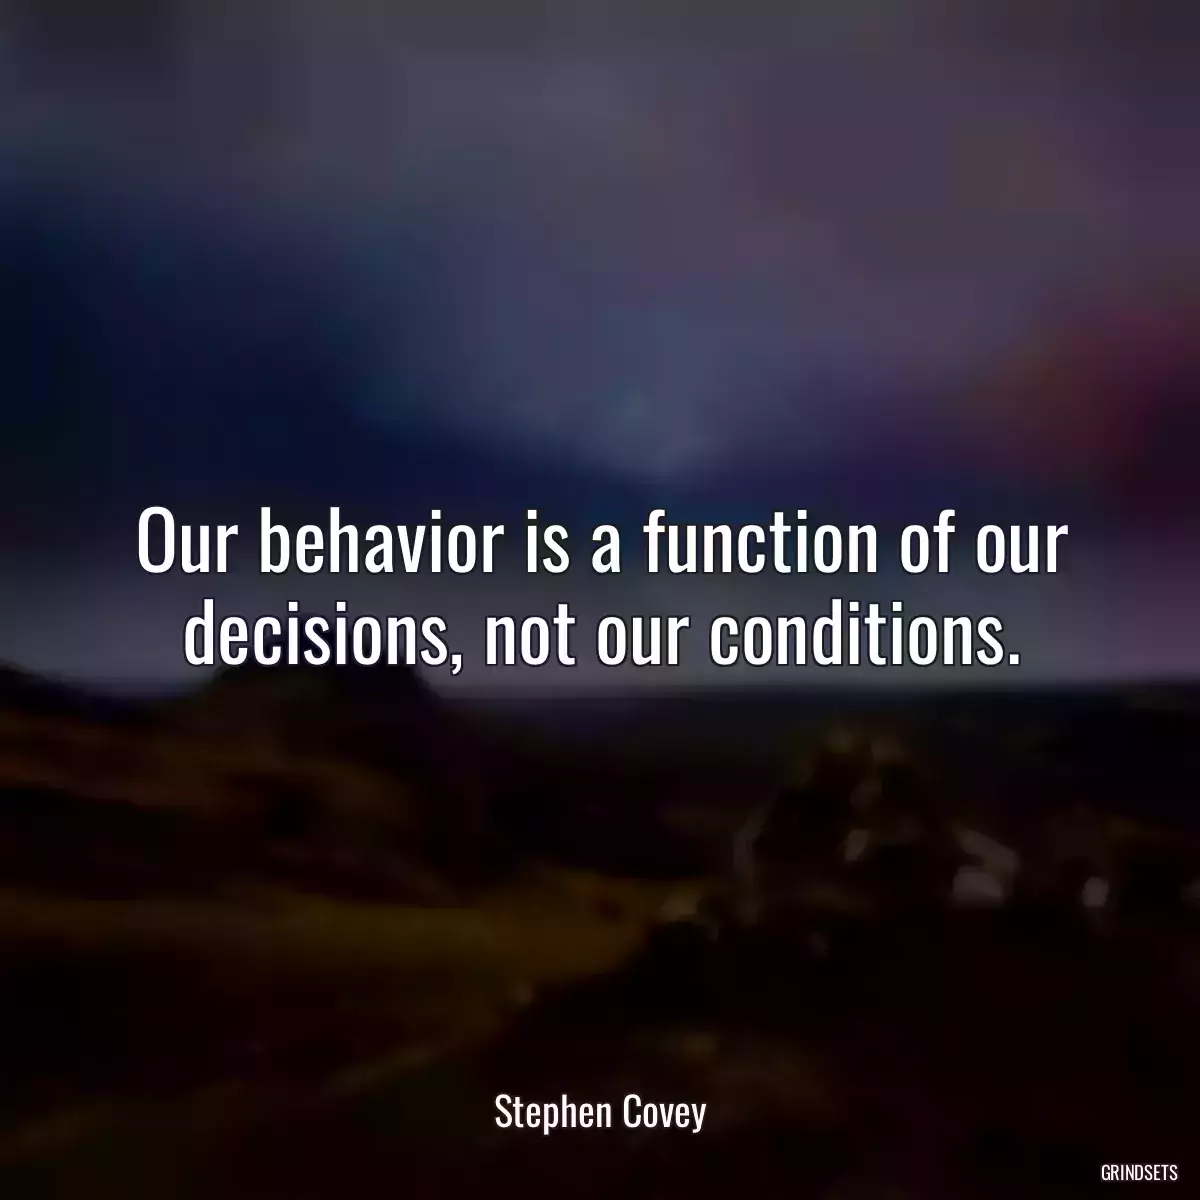 Our behavior is a function of our decisions, not our conditions.